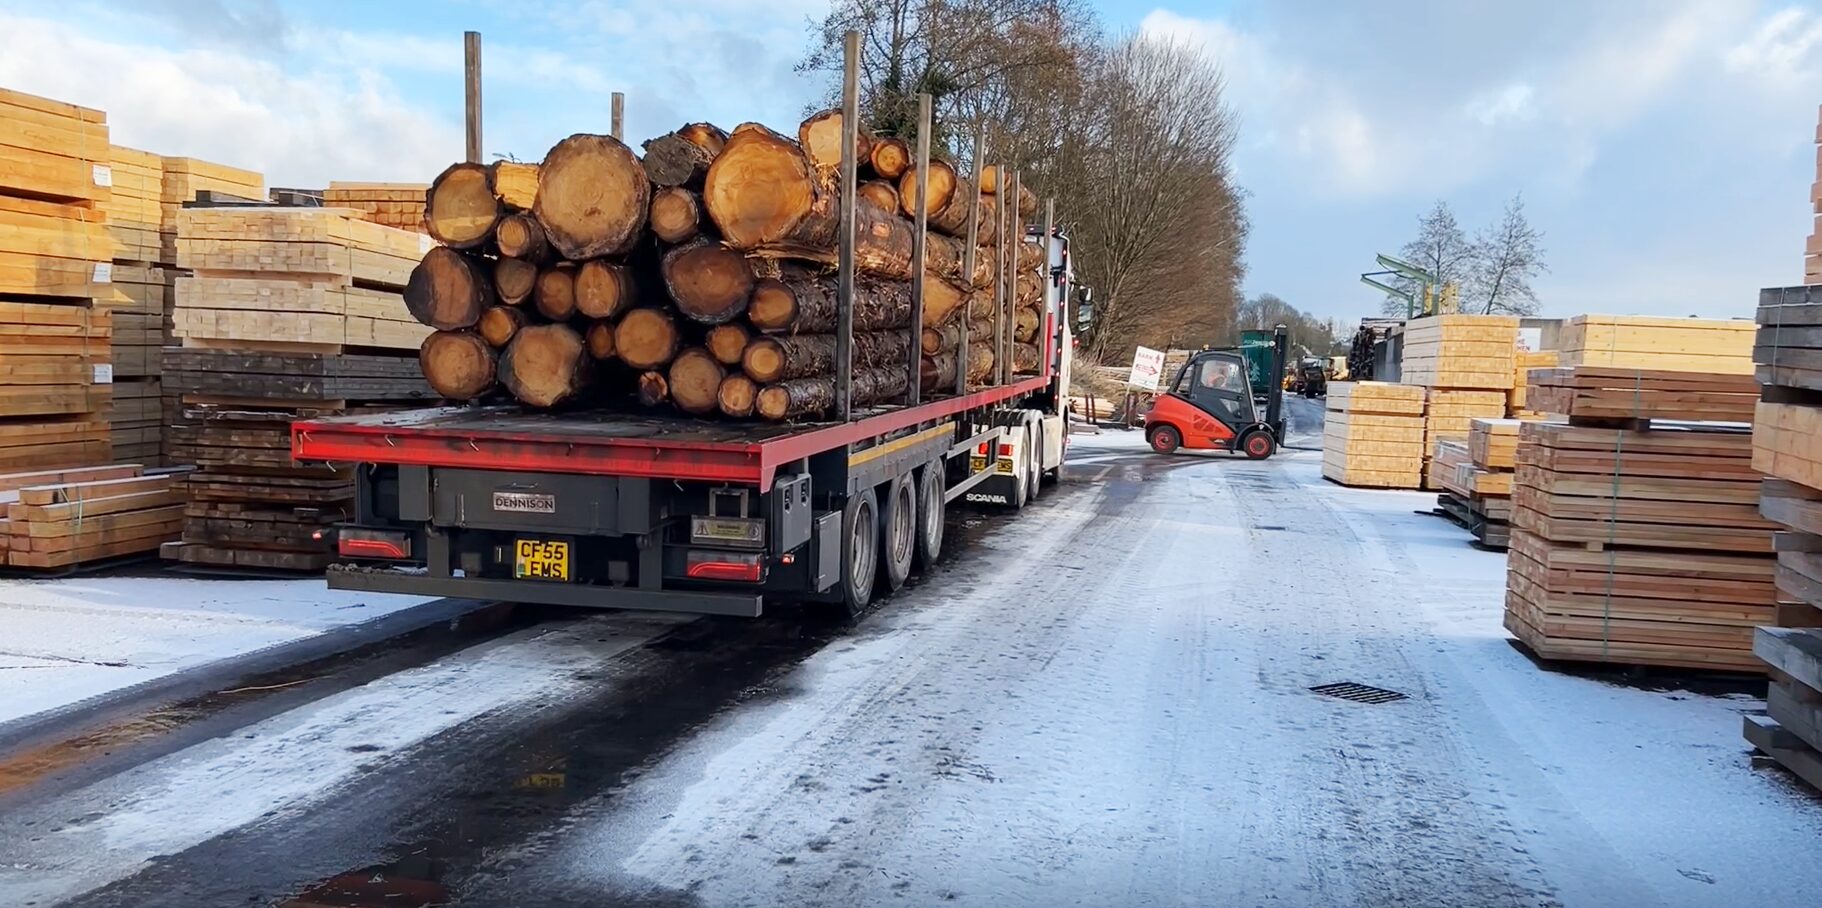 Timber yard safety - Improving health and safety in the wood industry